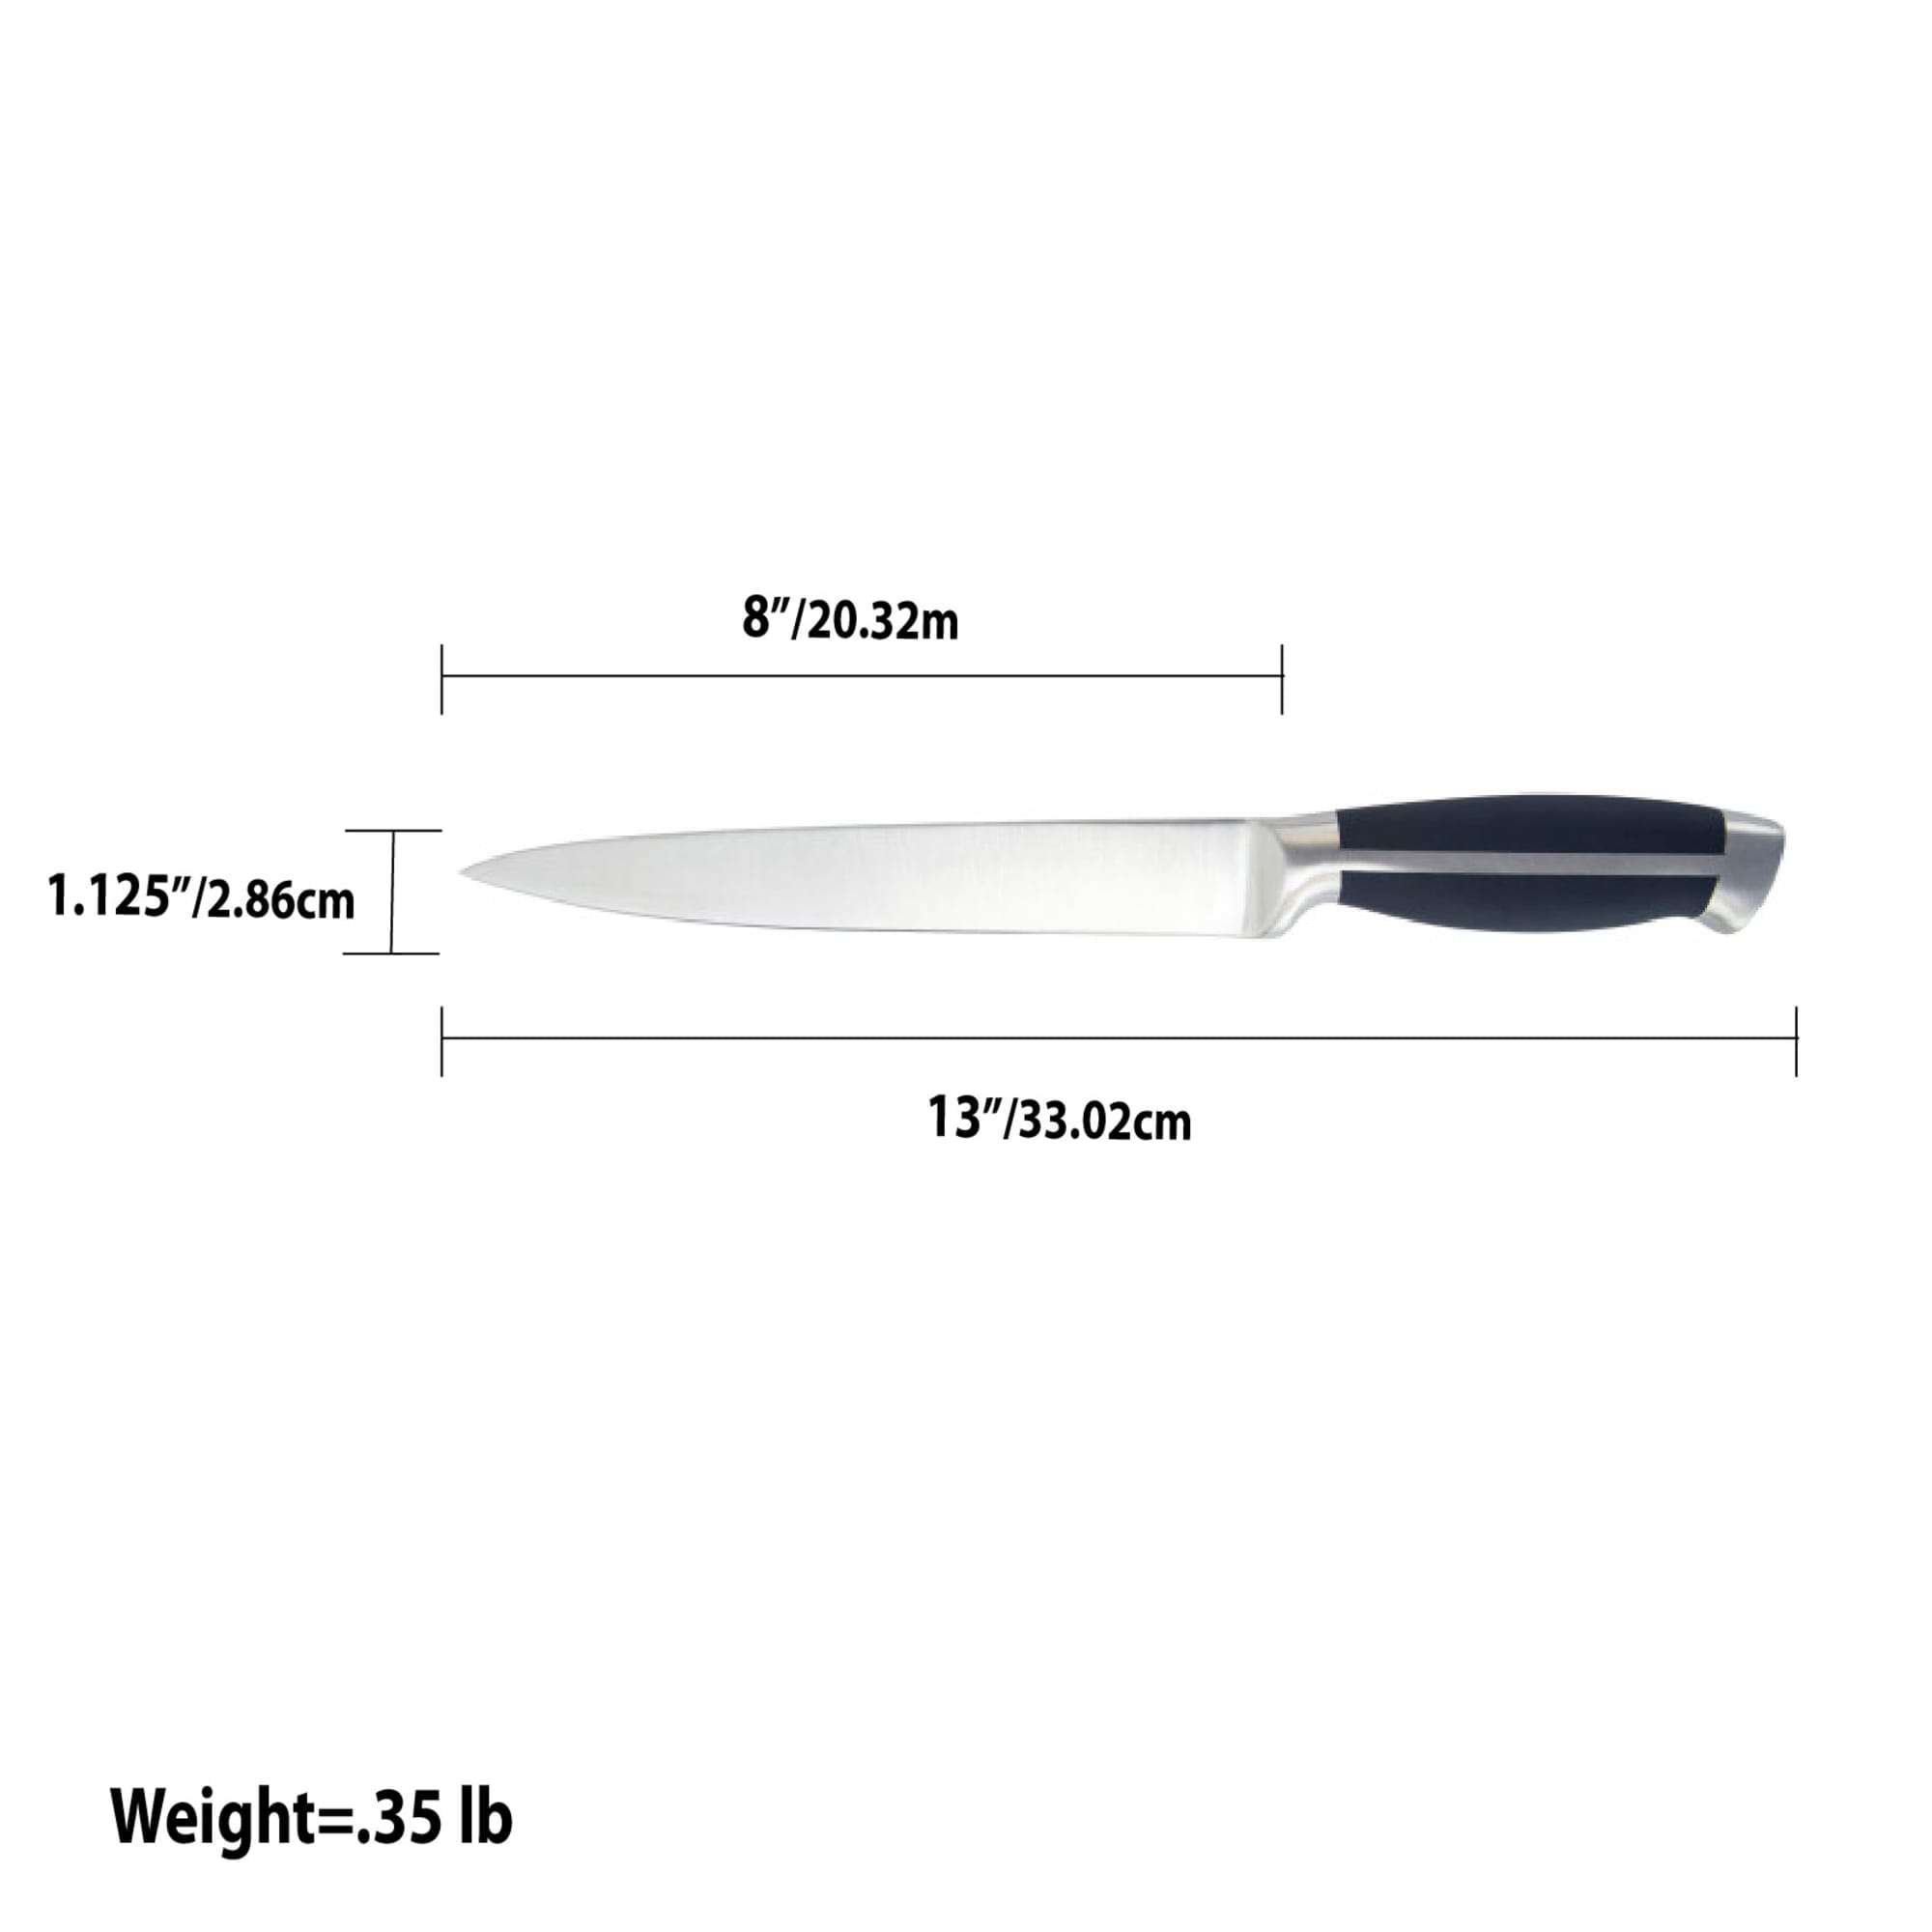 Home Basics Continental Collection 8" Slicing Knife $4.00 EACH, CASE PACK OF 24